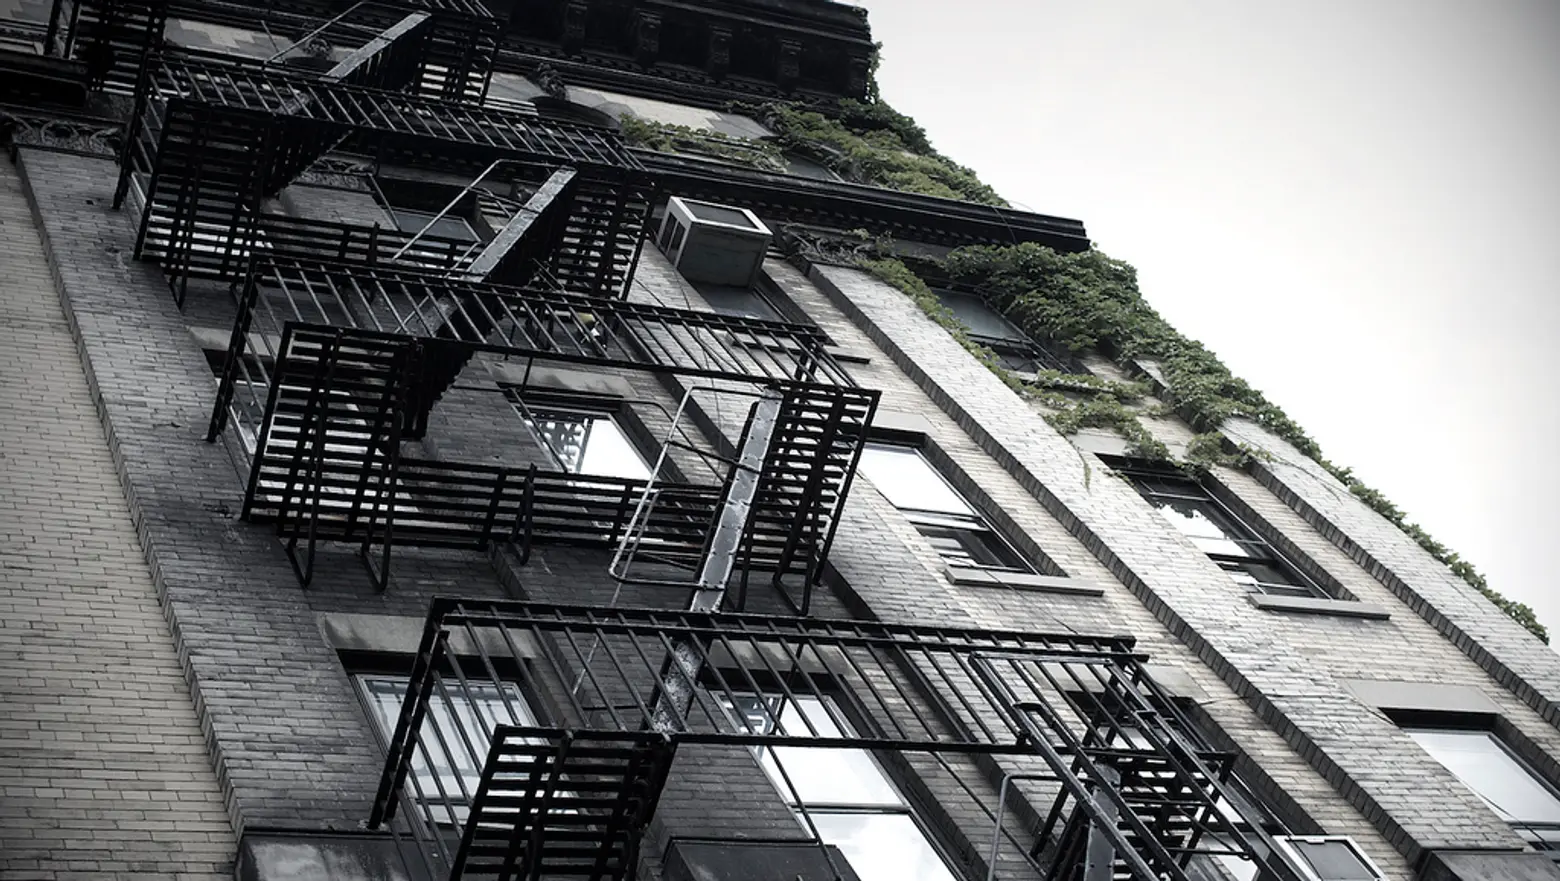 Fire Escapes Going Extinct as Building Codes Shift